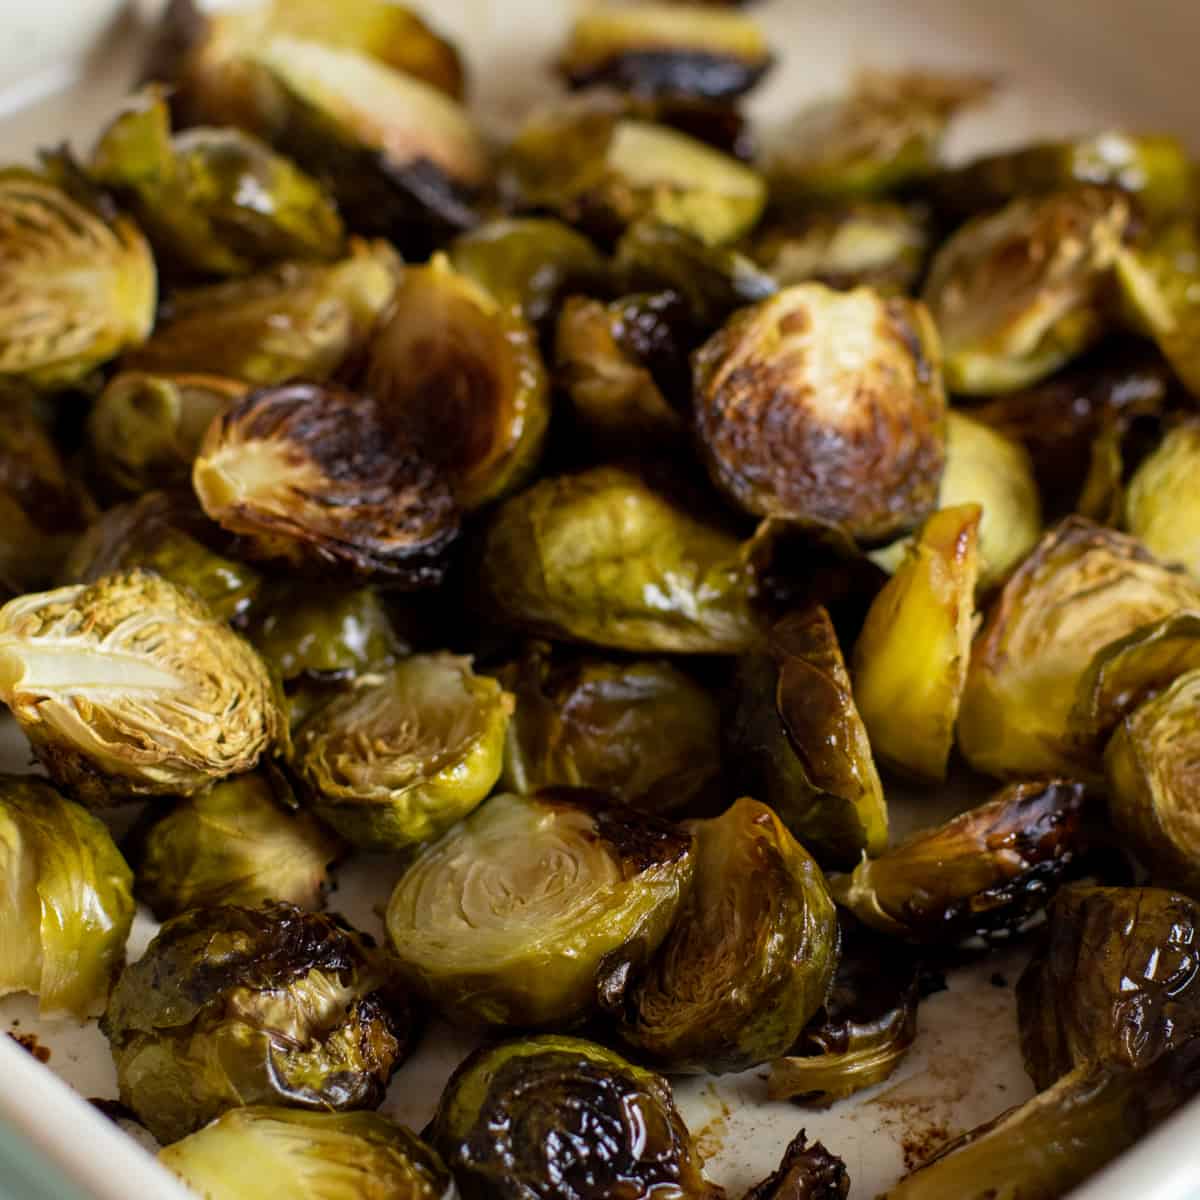 A baking dish with roasted Brussels sprouts.